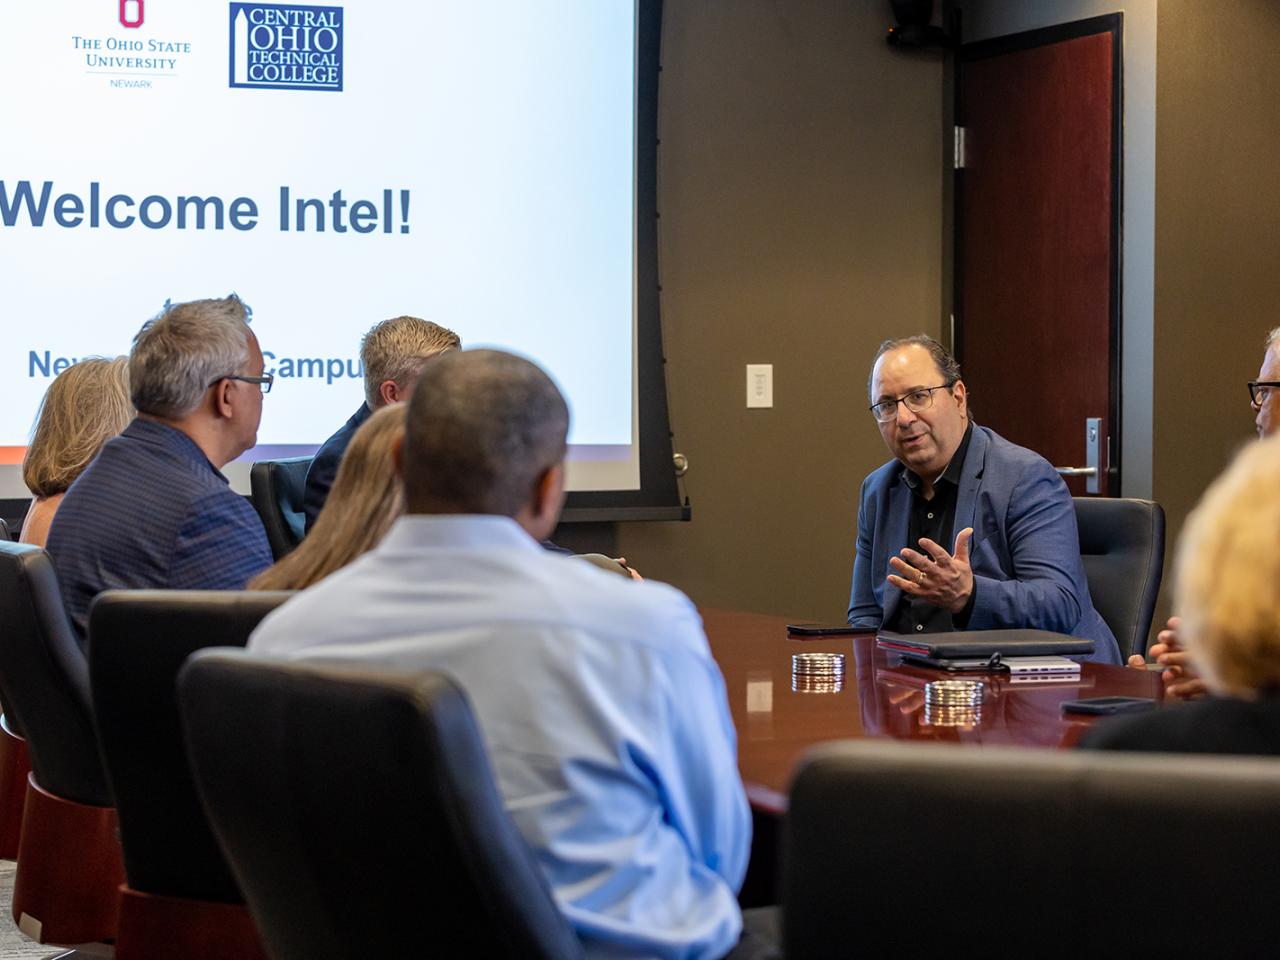 Intel Chief Global Operations Officer Keyvan Esfarjani address a group of people seated at a conference table.